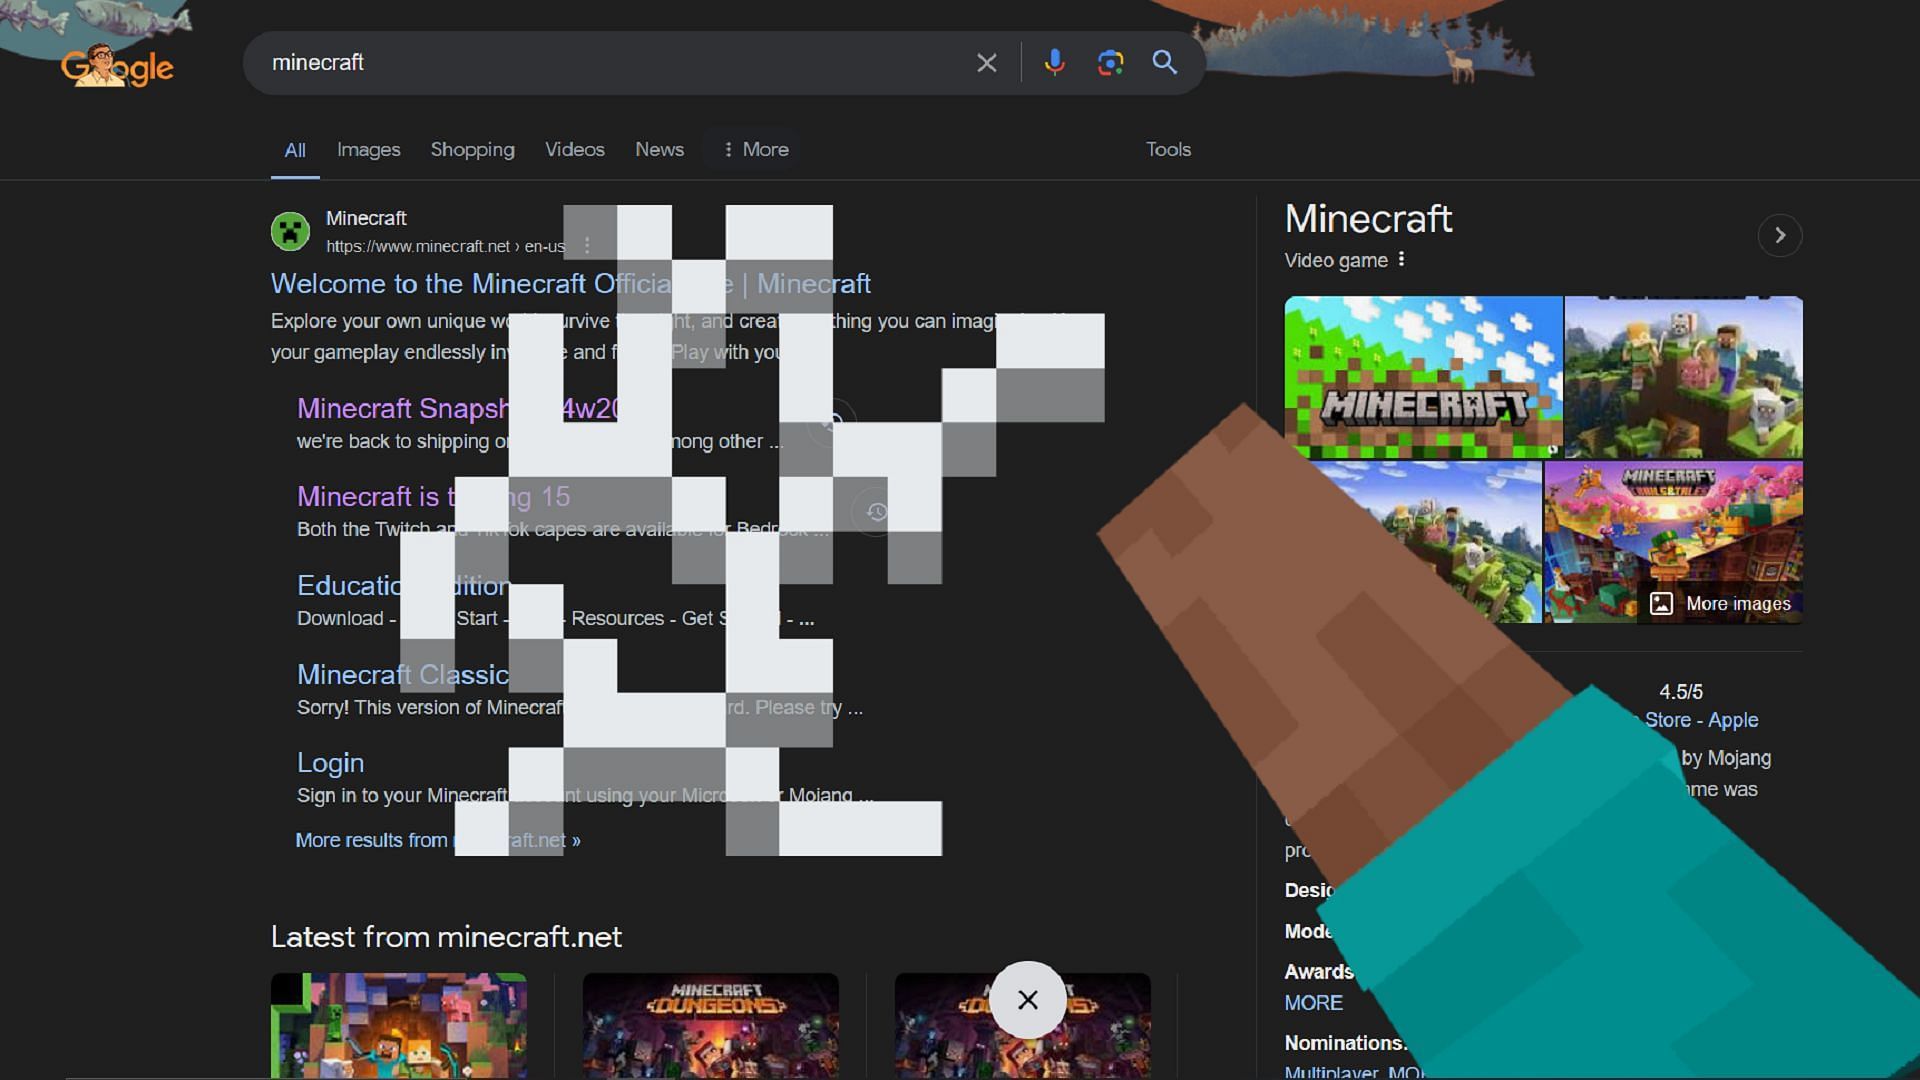 Steve breaks the Google search page like a block in Google&#039;s Minecraft minigame (Image via Google/Mojang)